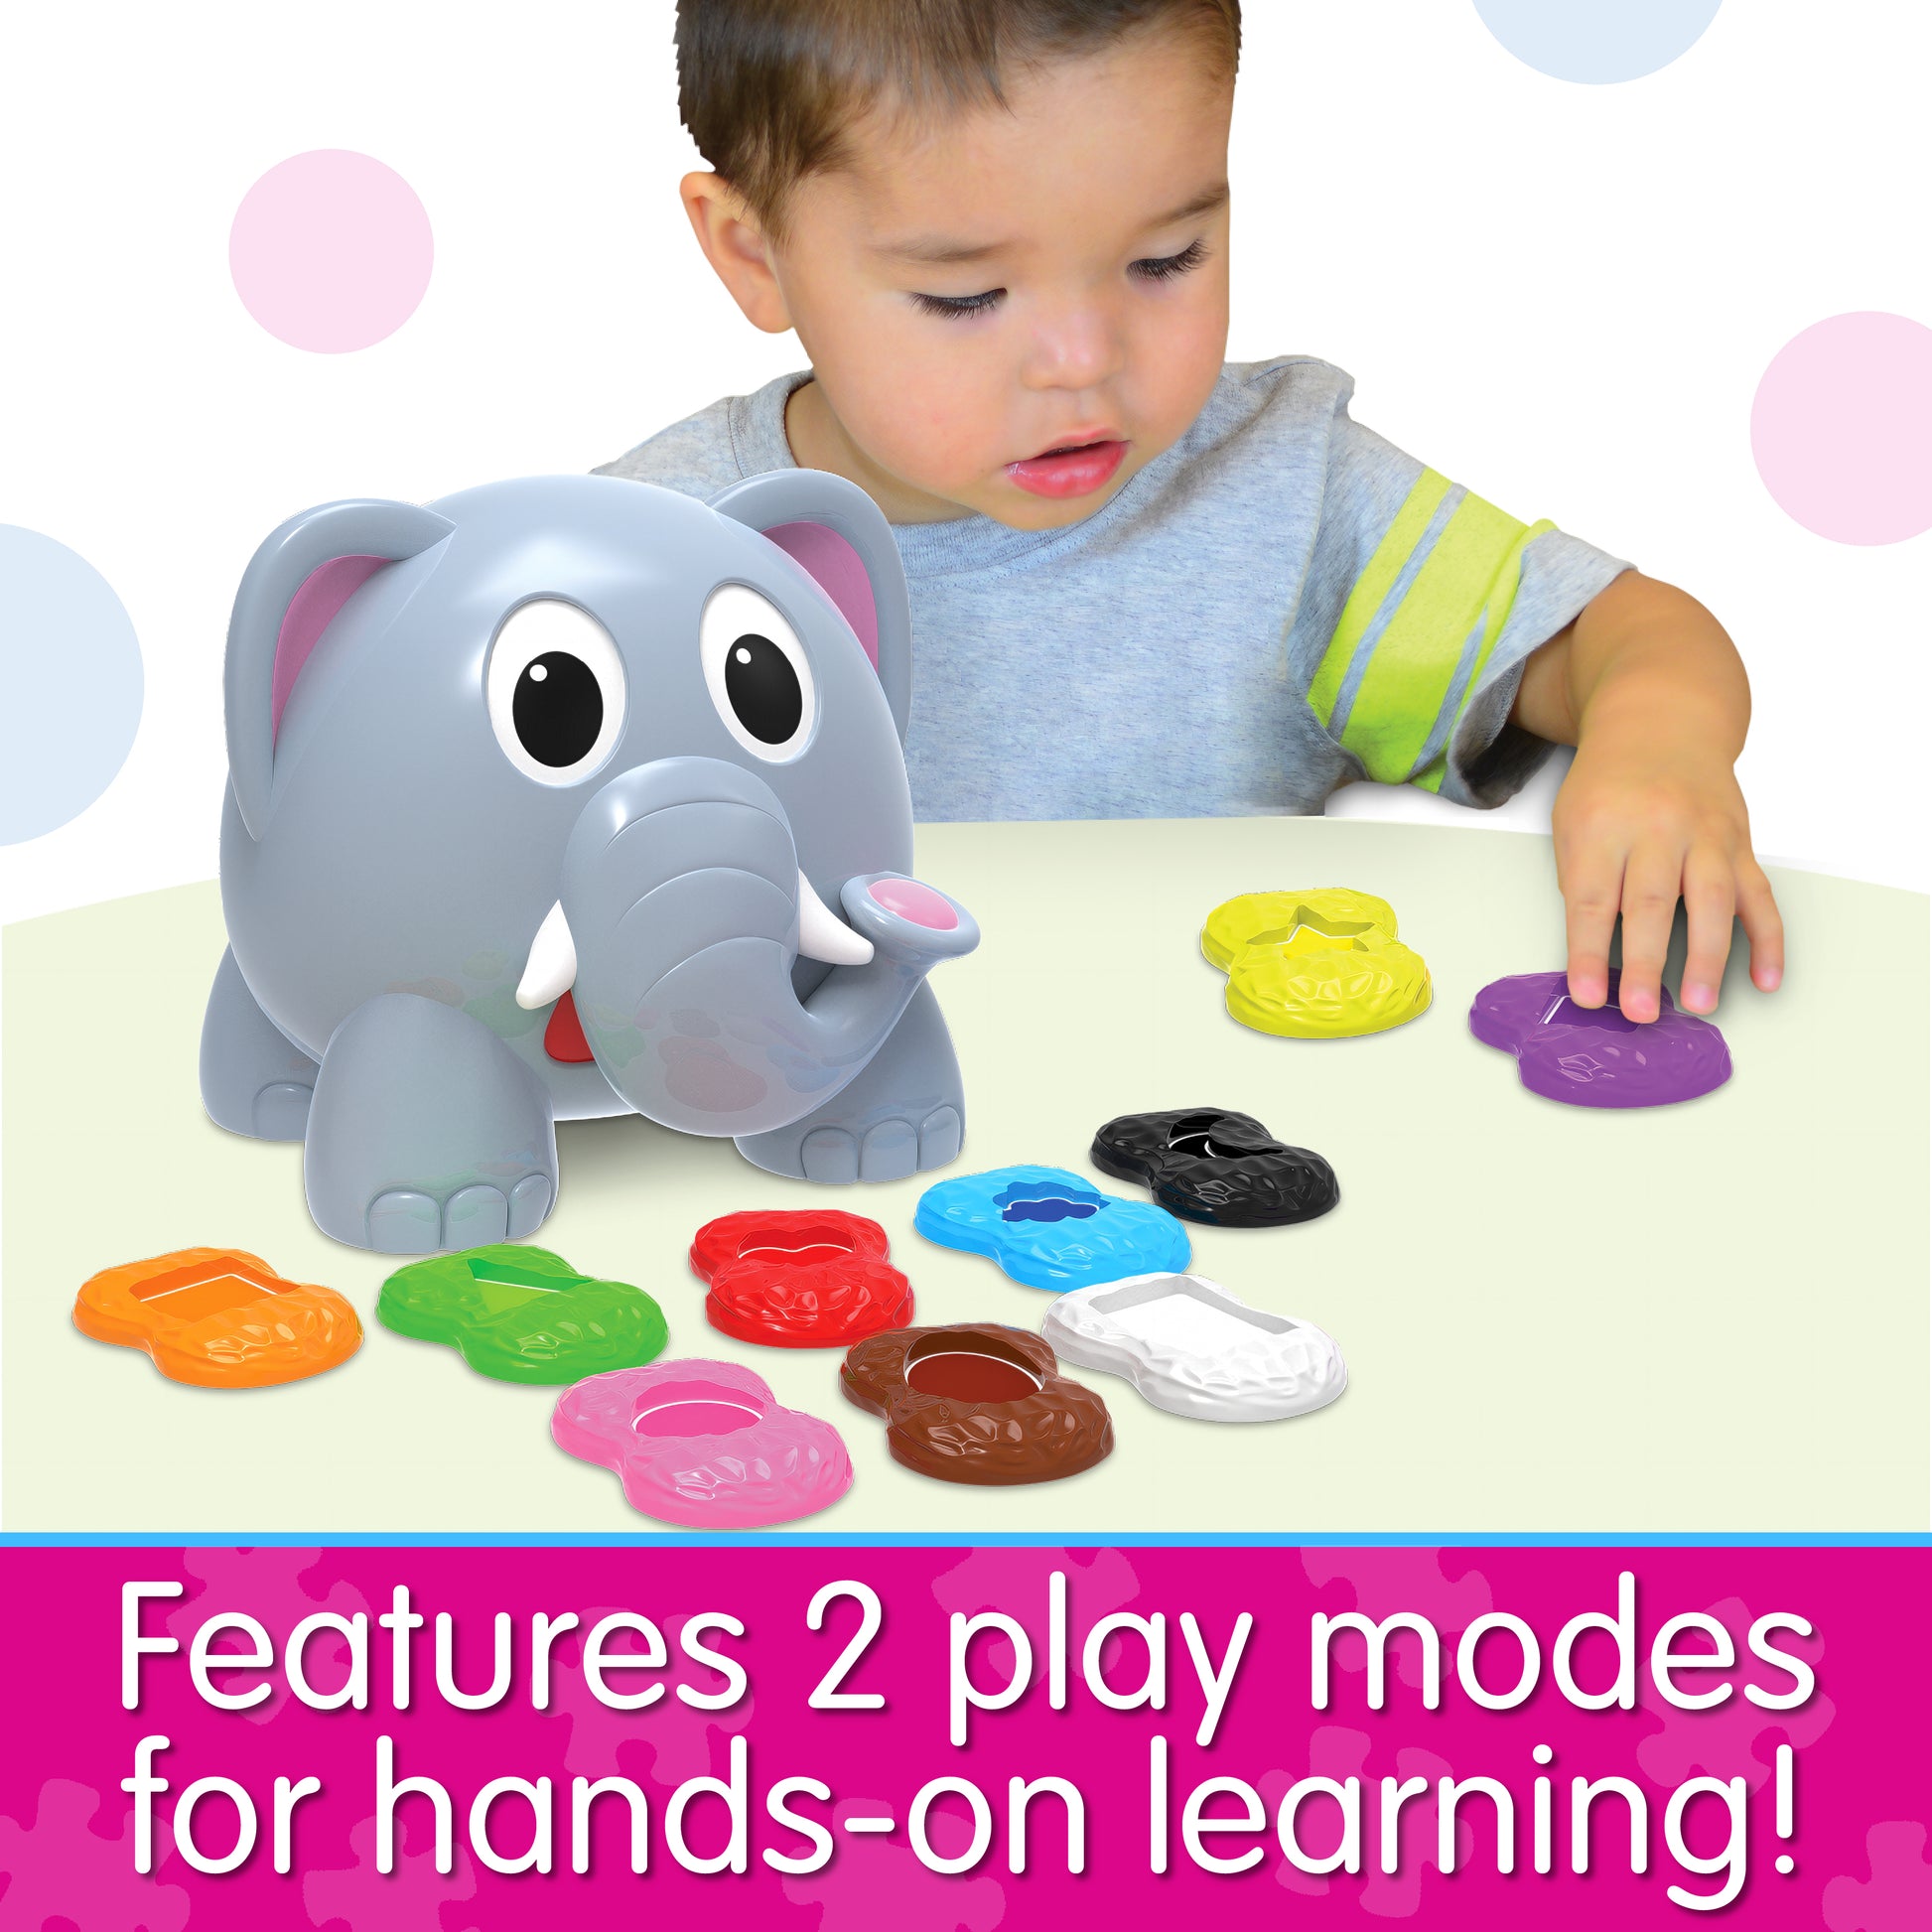 Infographic of young boy playing with Learn With Me Shapes Elephant that reads, "Features 2 play modes hands-on learning!"